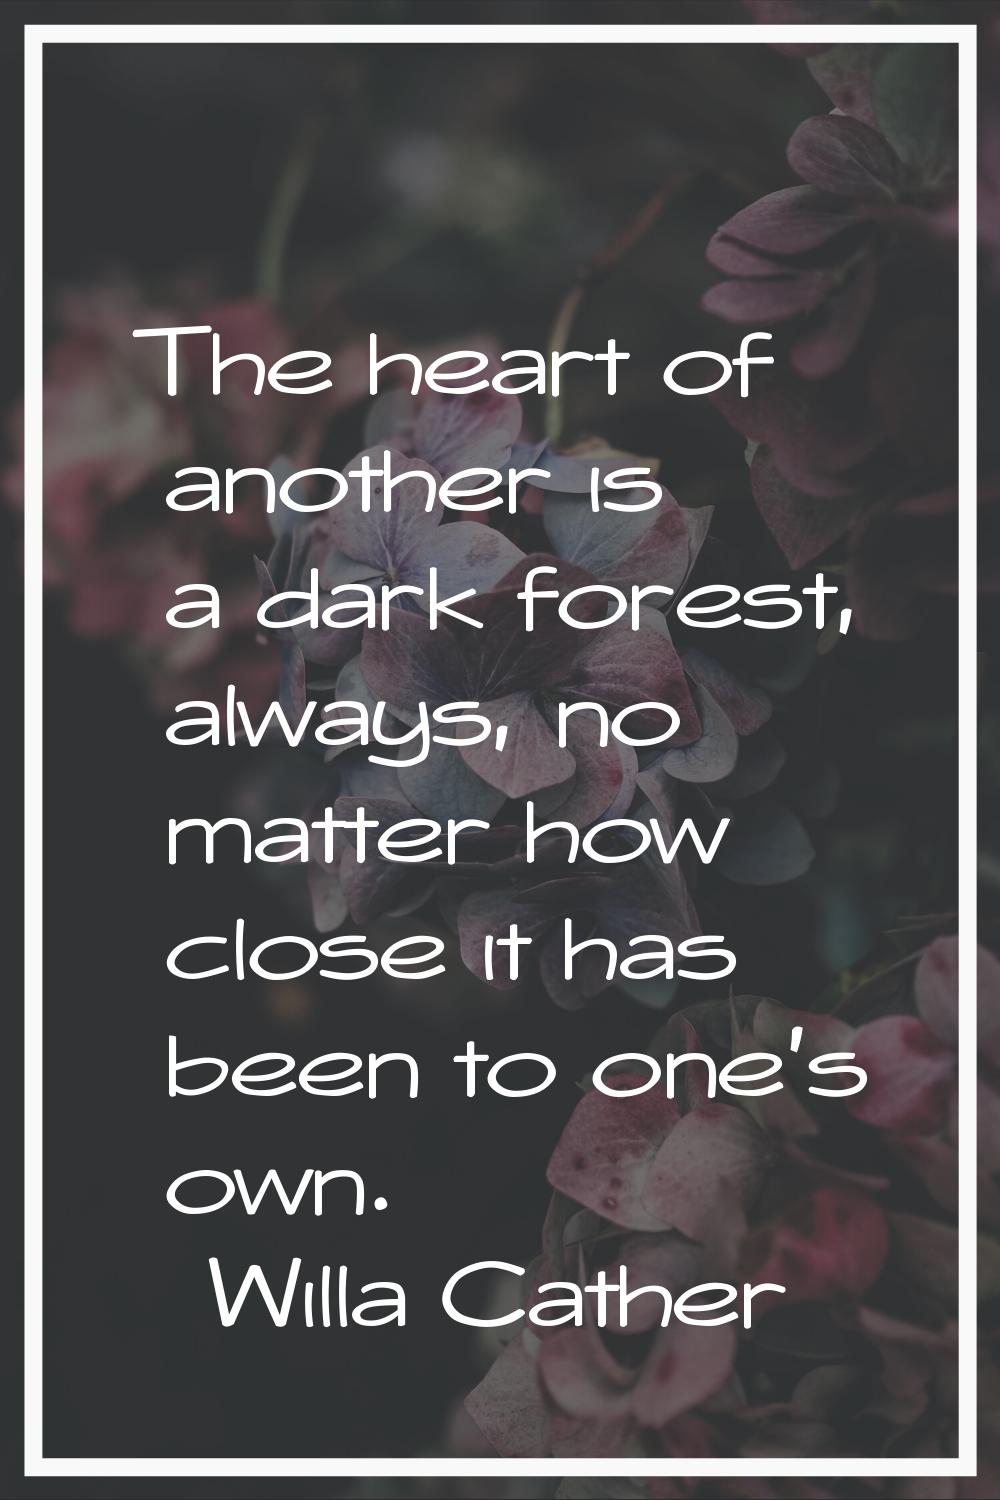 The heart of another is a dark forest, always, no matter how close it has been to one's own.